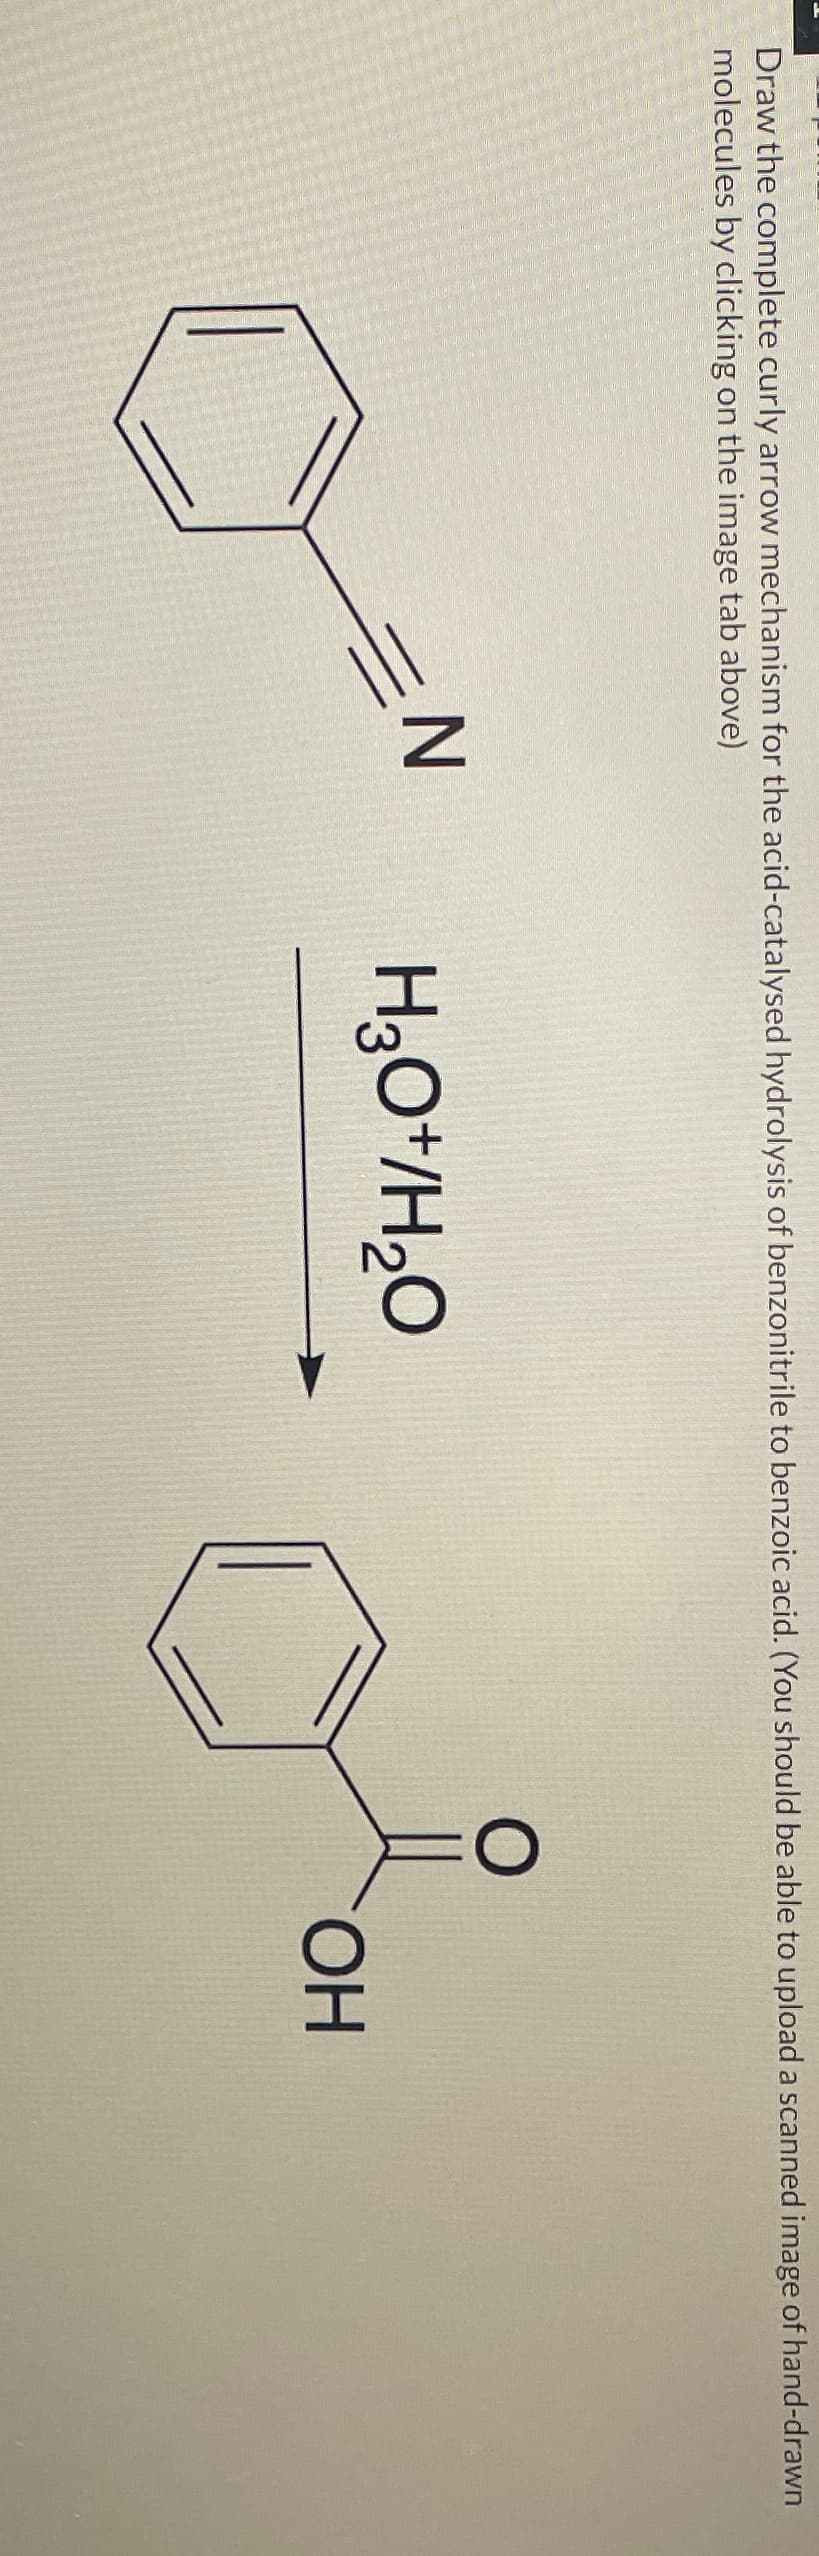 Draw the complete curly arrow mechanism for the acid-catalysed hydrolysis of benzonitrile to benzoic acid. (You should be able to upload a scanned image of hand-drawn
molecules by clicking on the image tab above)
=N
H3O+/H₂O
OH